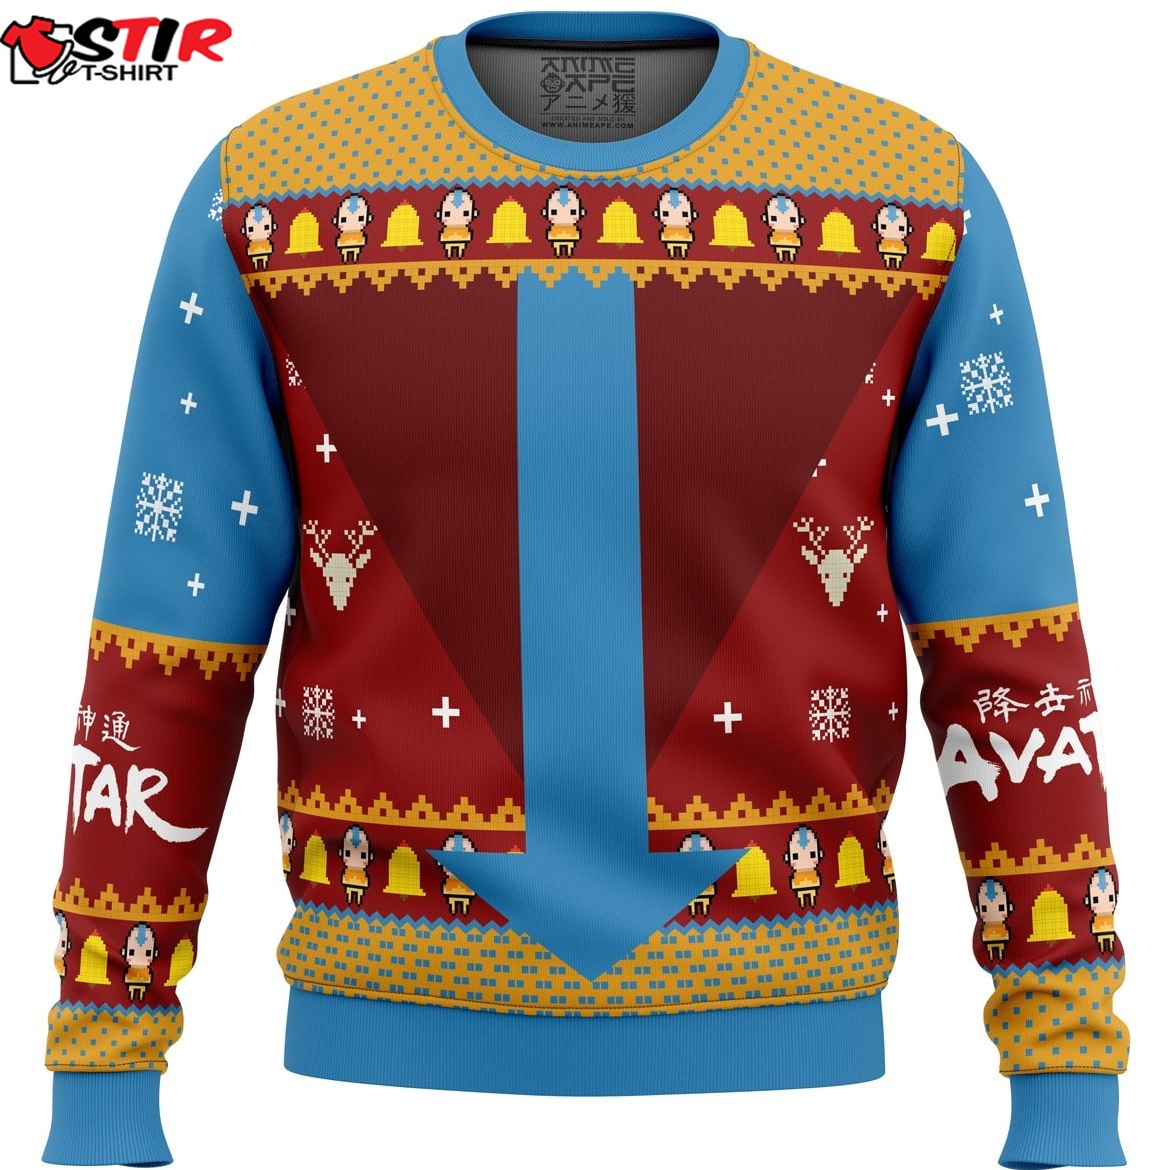 Airbenders Air Nomads Avatar Ugly Christmas Sweater Stirtshirt